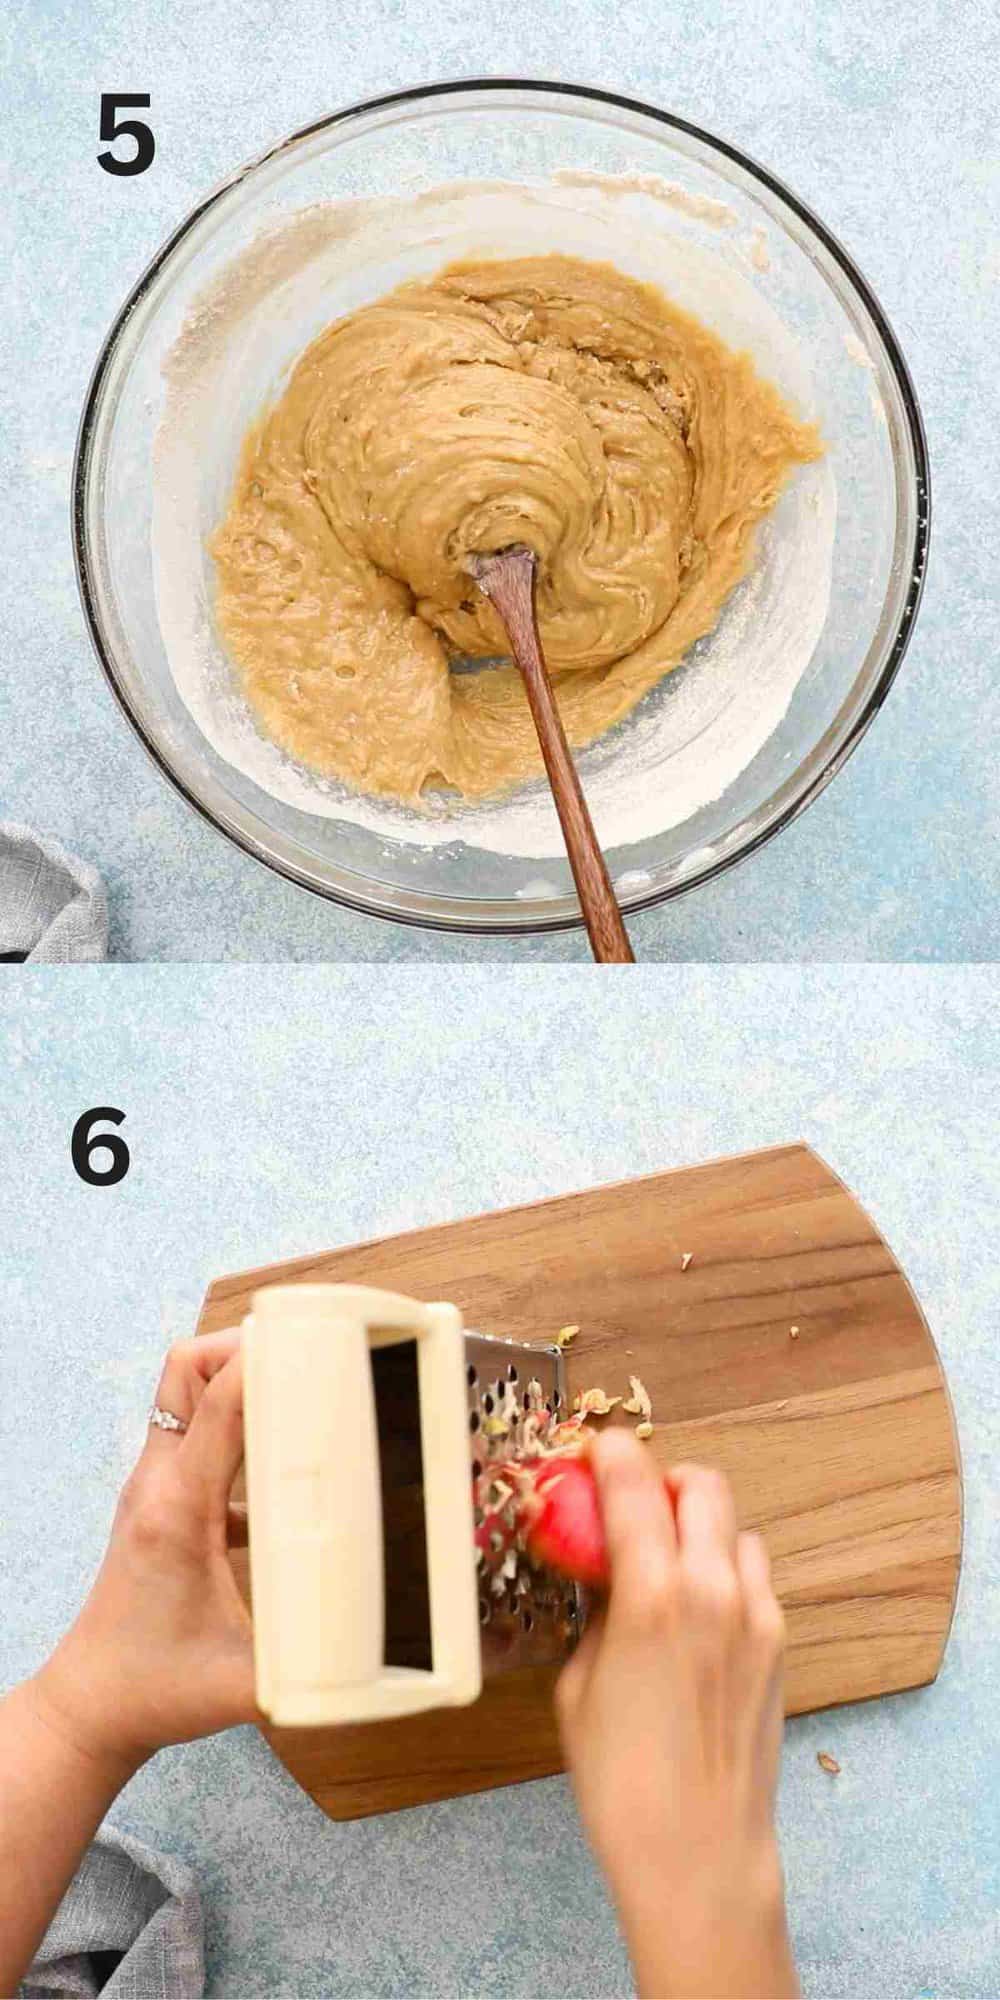 2 photo collage of mixing batter and grating an apple using a box grater.